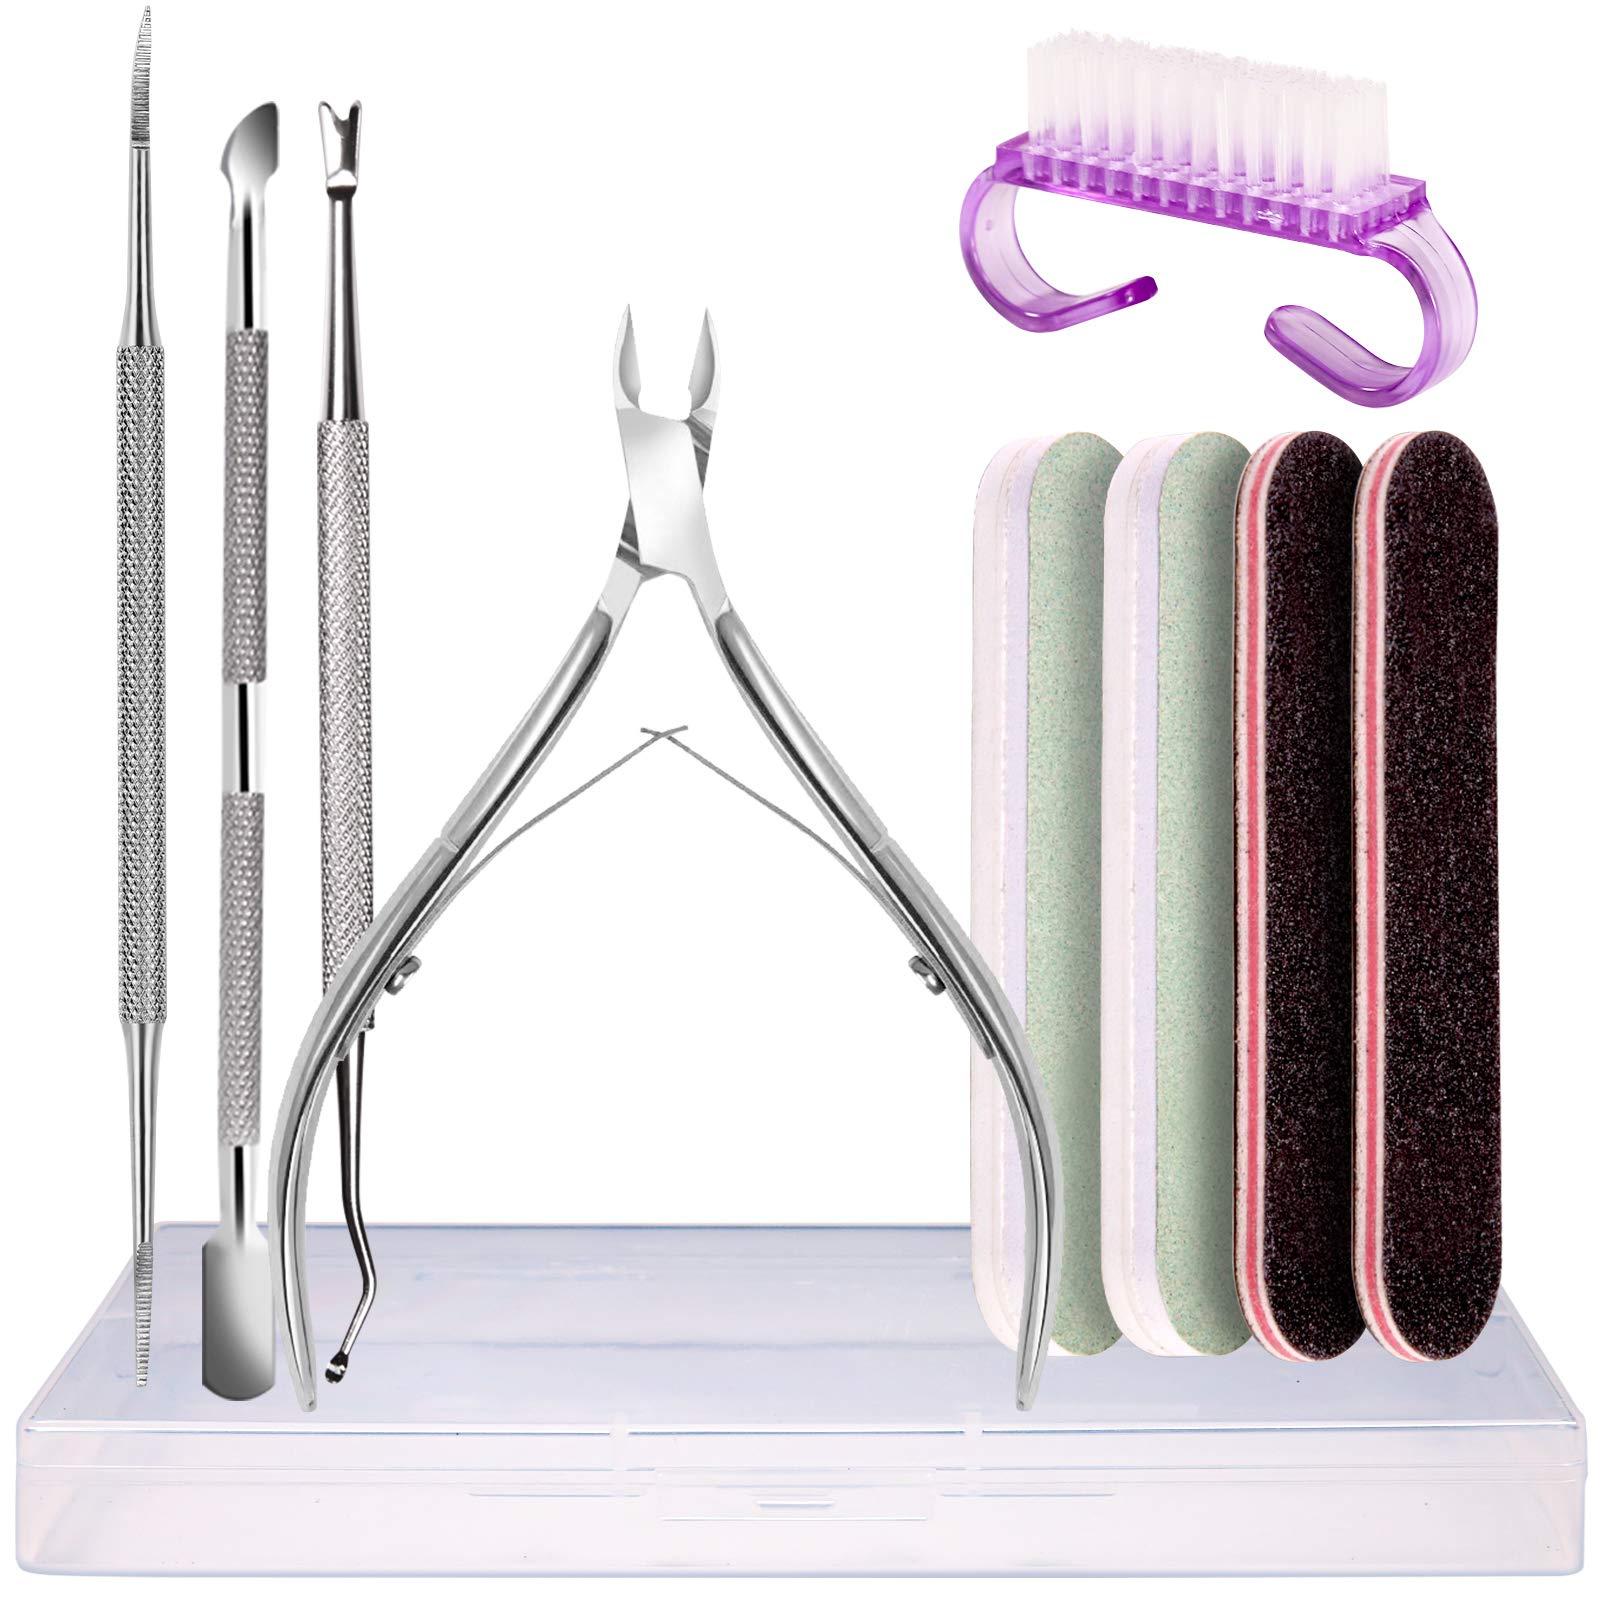 Cuticle Nipper with Ingrown Toenail File & Lifters Set, Teenitor Stainless Steel Cuticle Cutters, Nail Cuticle Fork, Cuticle Pusher for Dead Skin with Mini Nail File 100/180 & Nail Shiner, Nail Brush